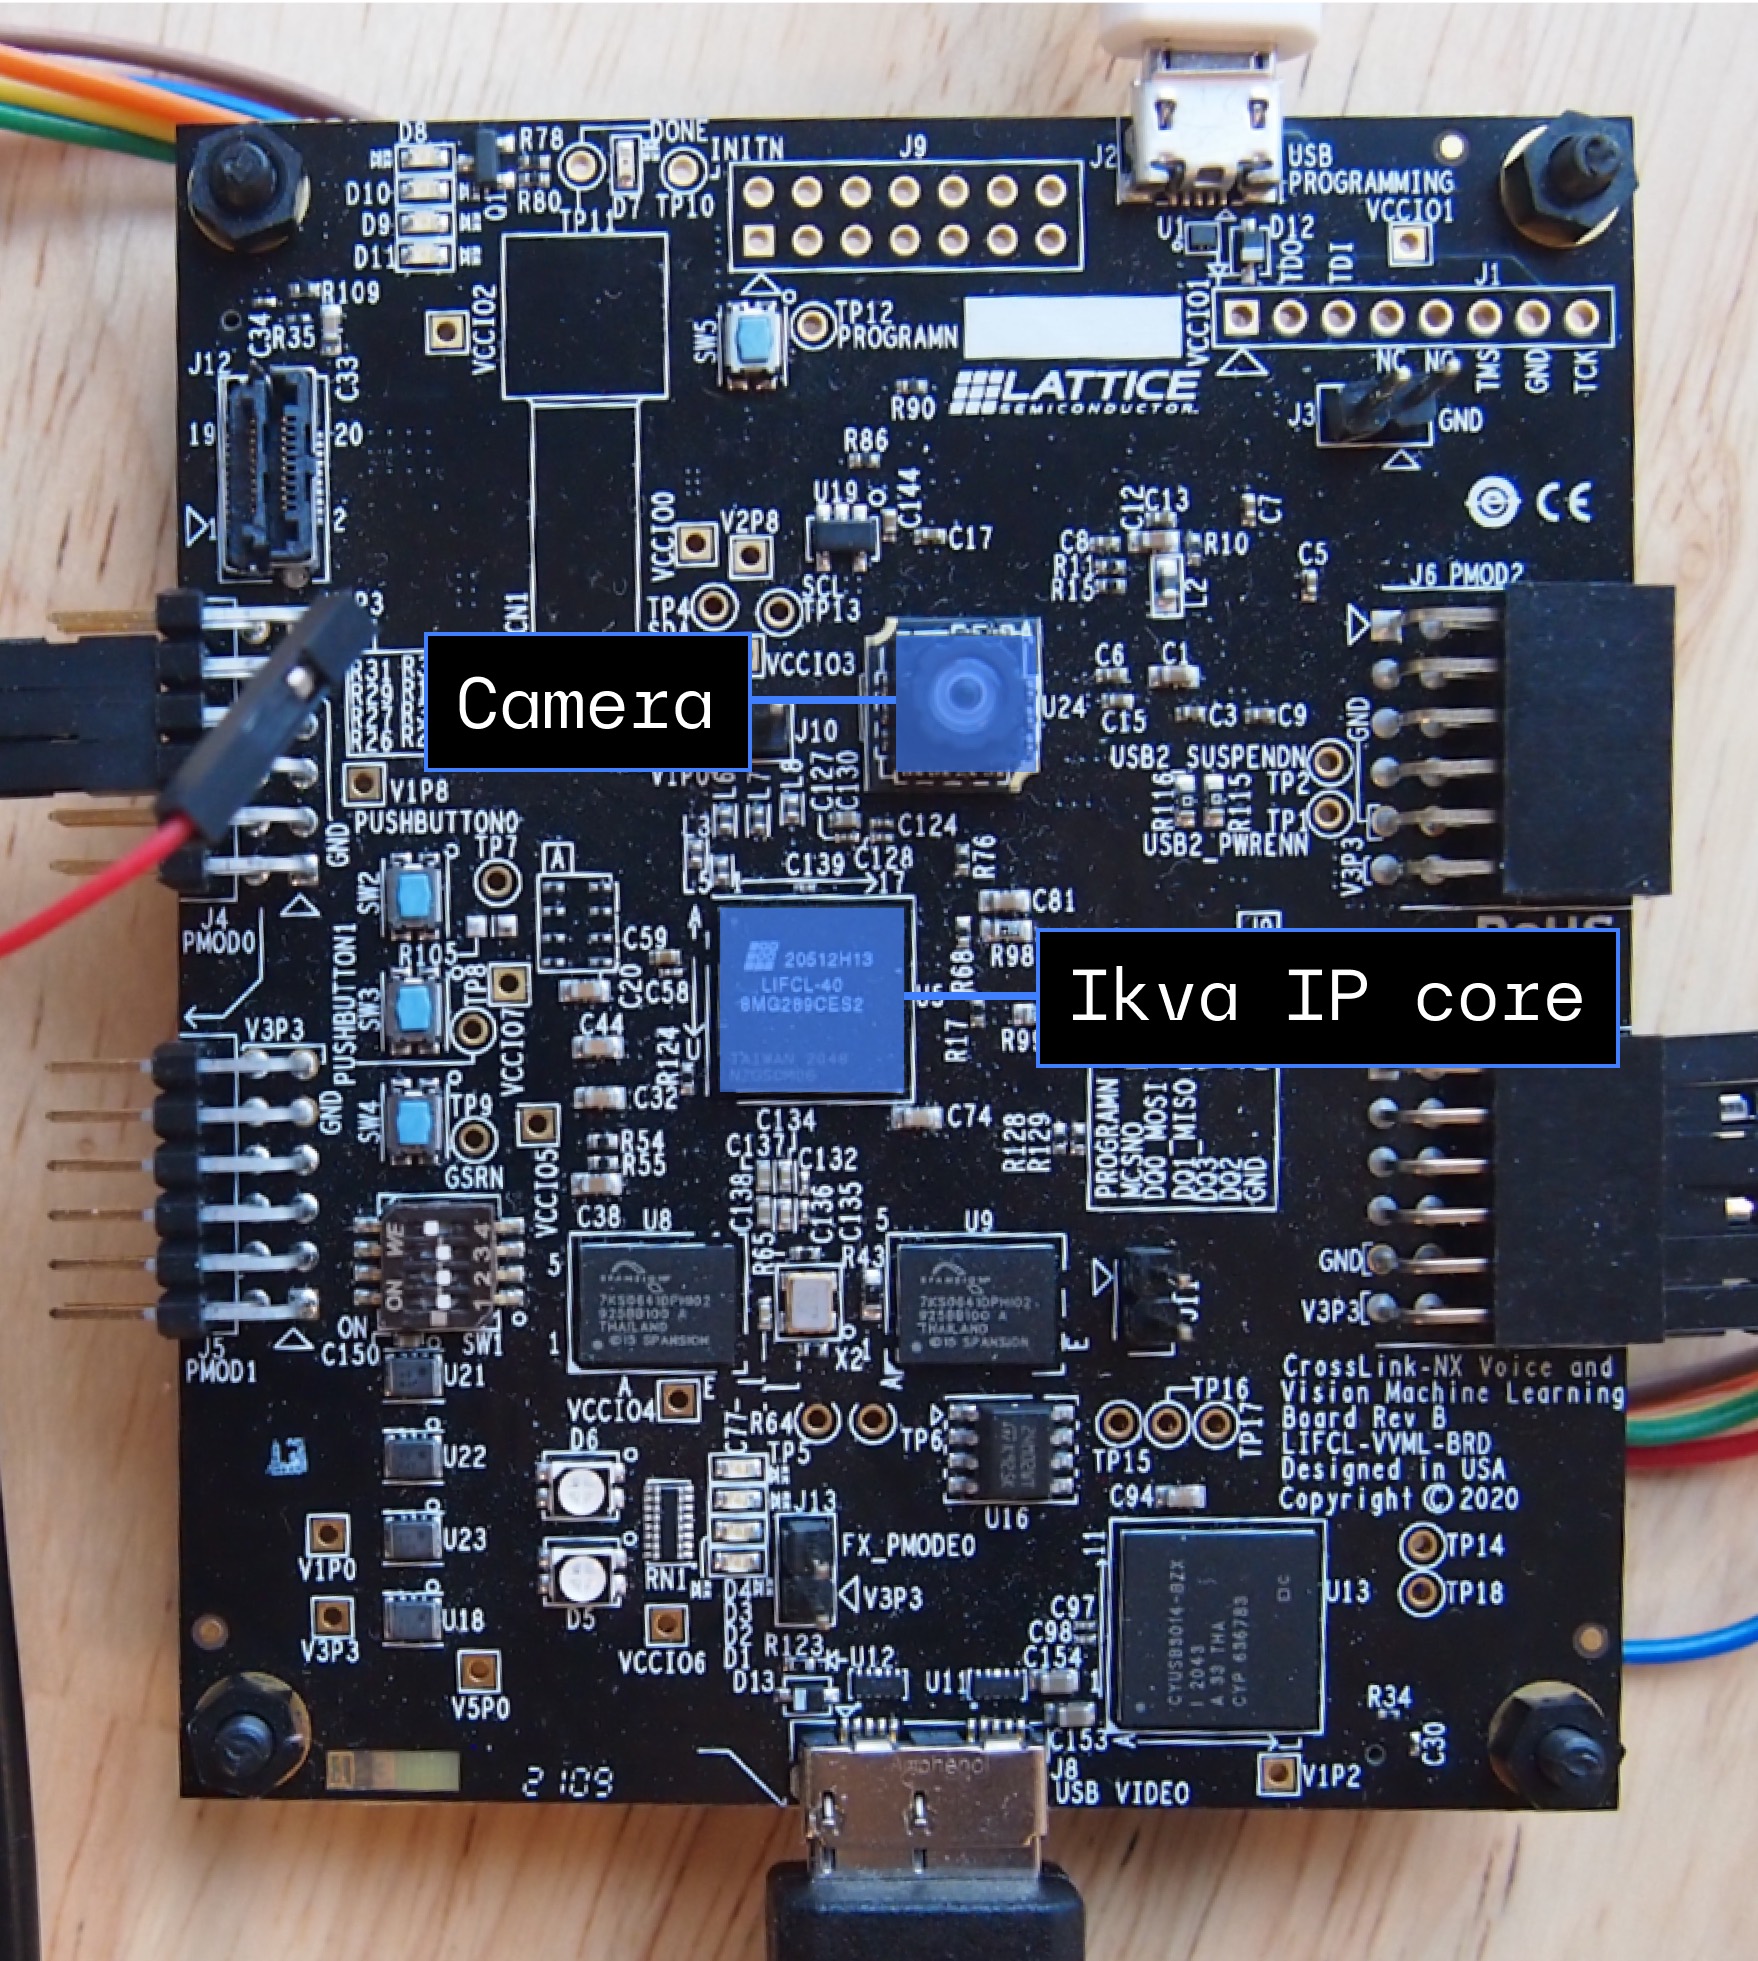 The Lattice CrossLink-NX Voice & Vision Machine Learning Board with the CrossLink-NX LIFCL-40 FPGA